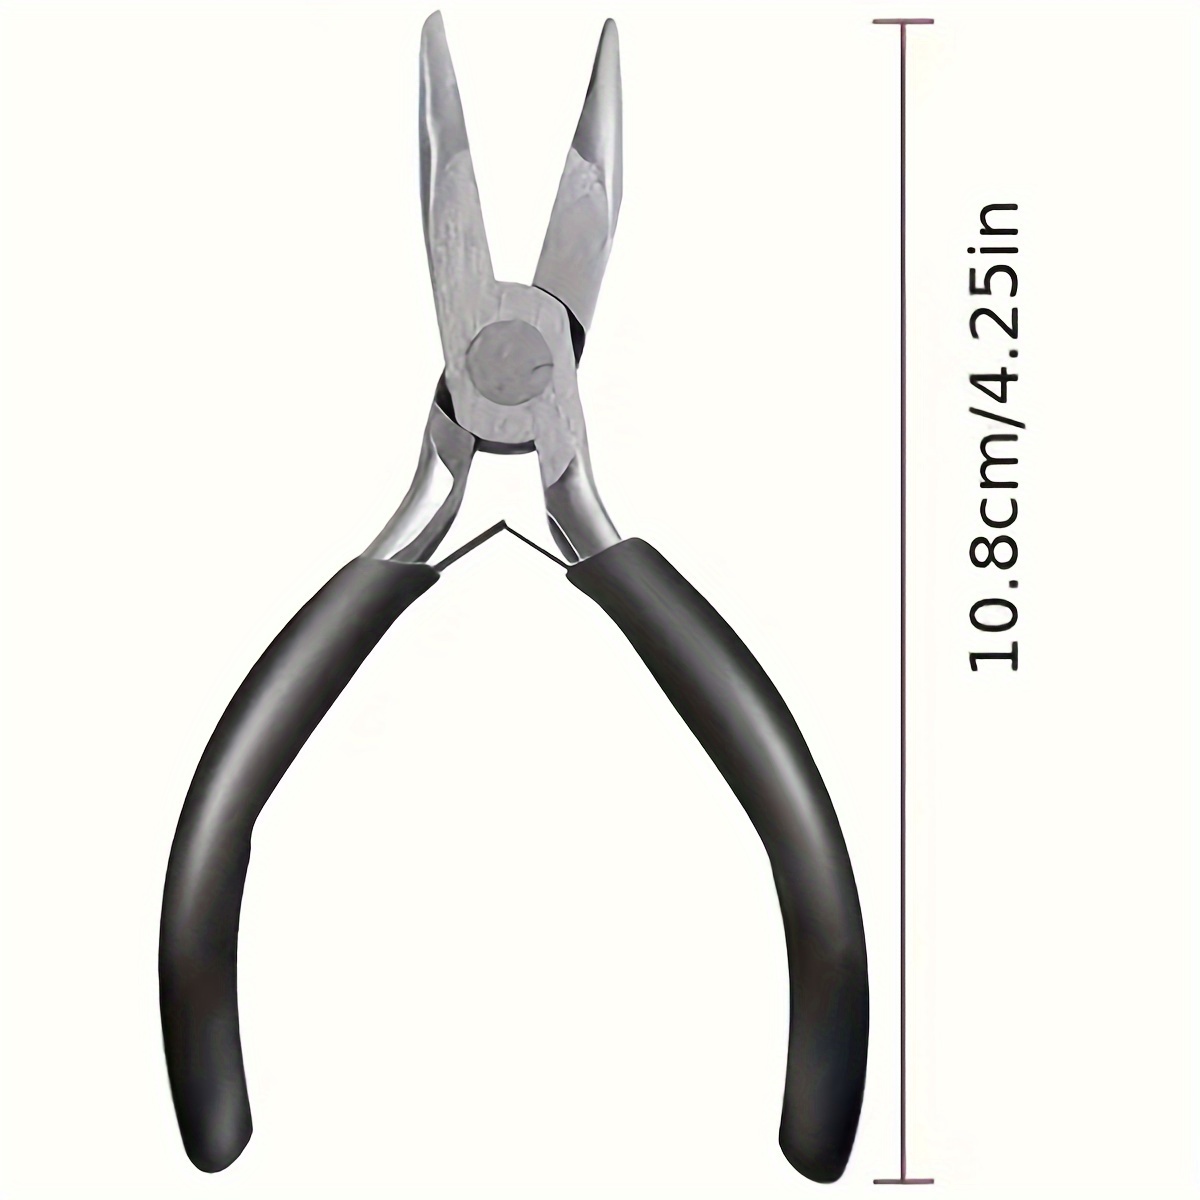 3 Pieces Jewelry Pliers, Tool Kit Pliers Jewelry Making Tools, Needle Nose  Pliers, Long Nose Pliers, Chain Nose Pliers, Wire Cutter